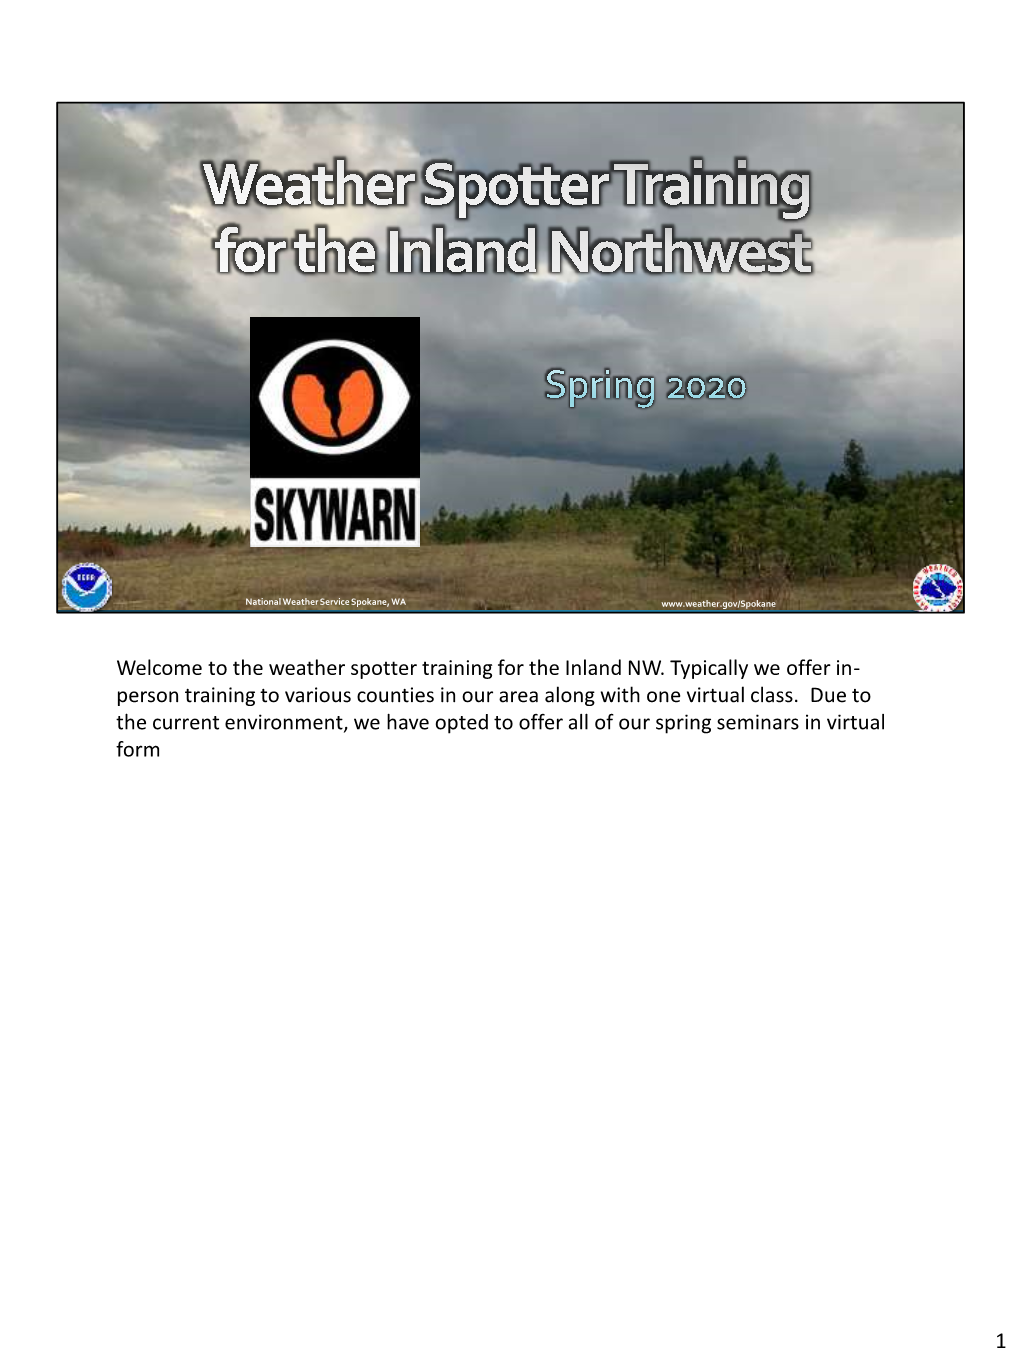 Welcome to the Weather Spotter Training for the Inland NW. Typically We Offer In- Person Training to Various Counties in Our Area Along with One Virtual Class